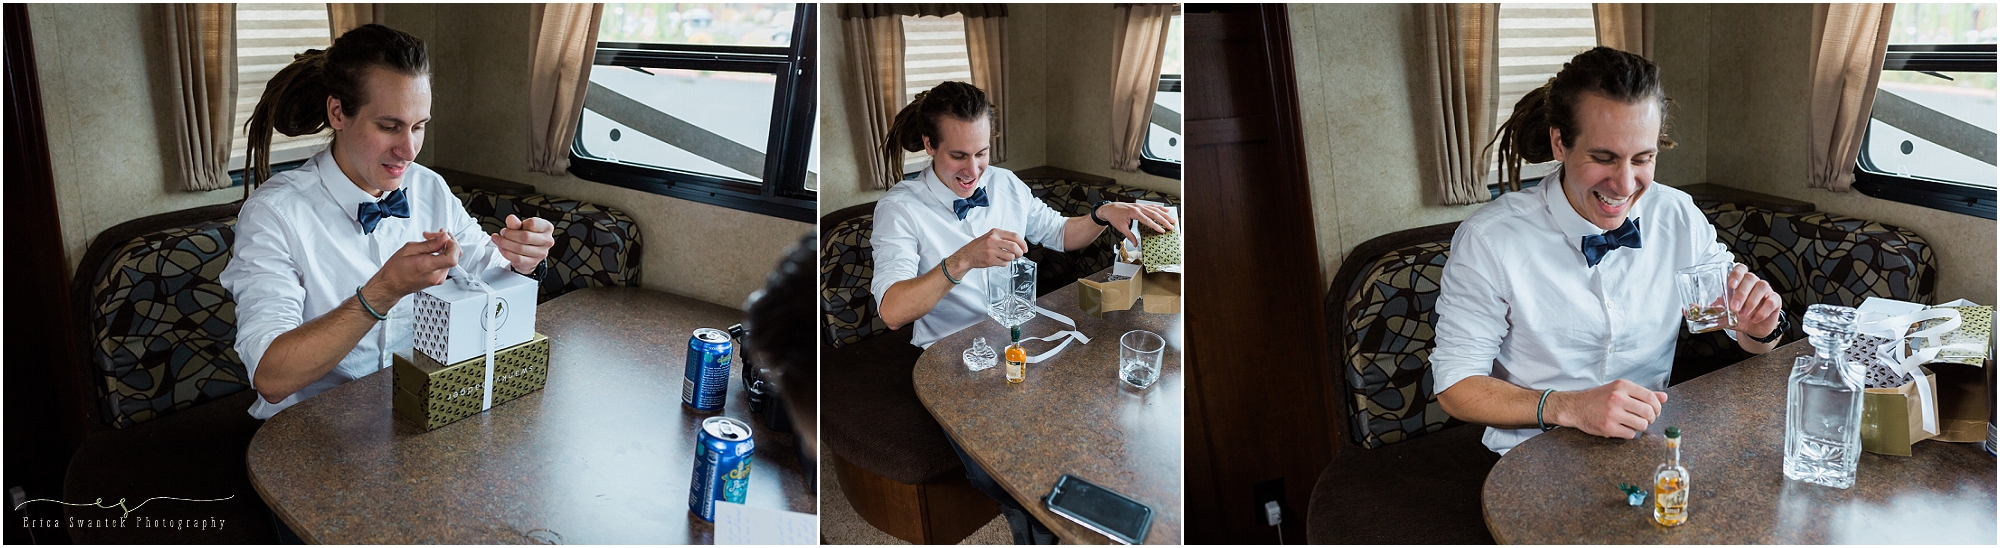 The groom opens his custom whiskey decanter from his bride at this Worthy Brewing wedding in Bend Oregon. | Erica Swantek Photography